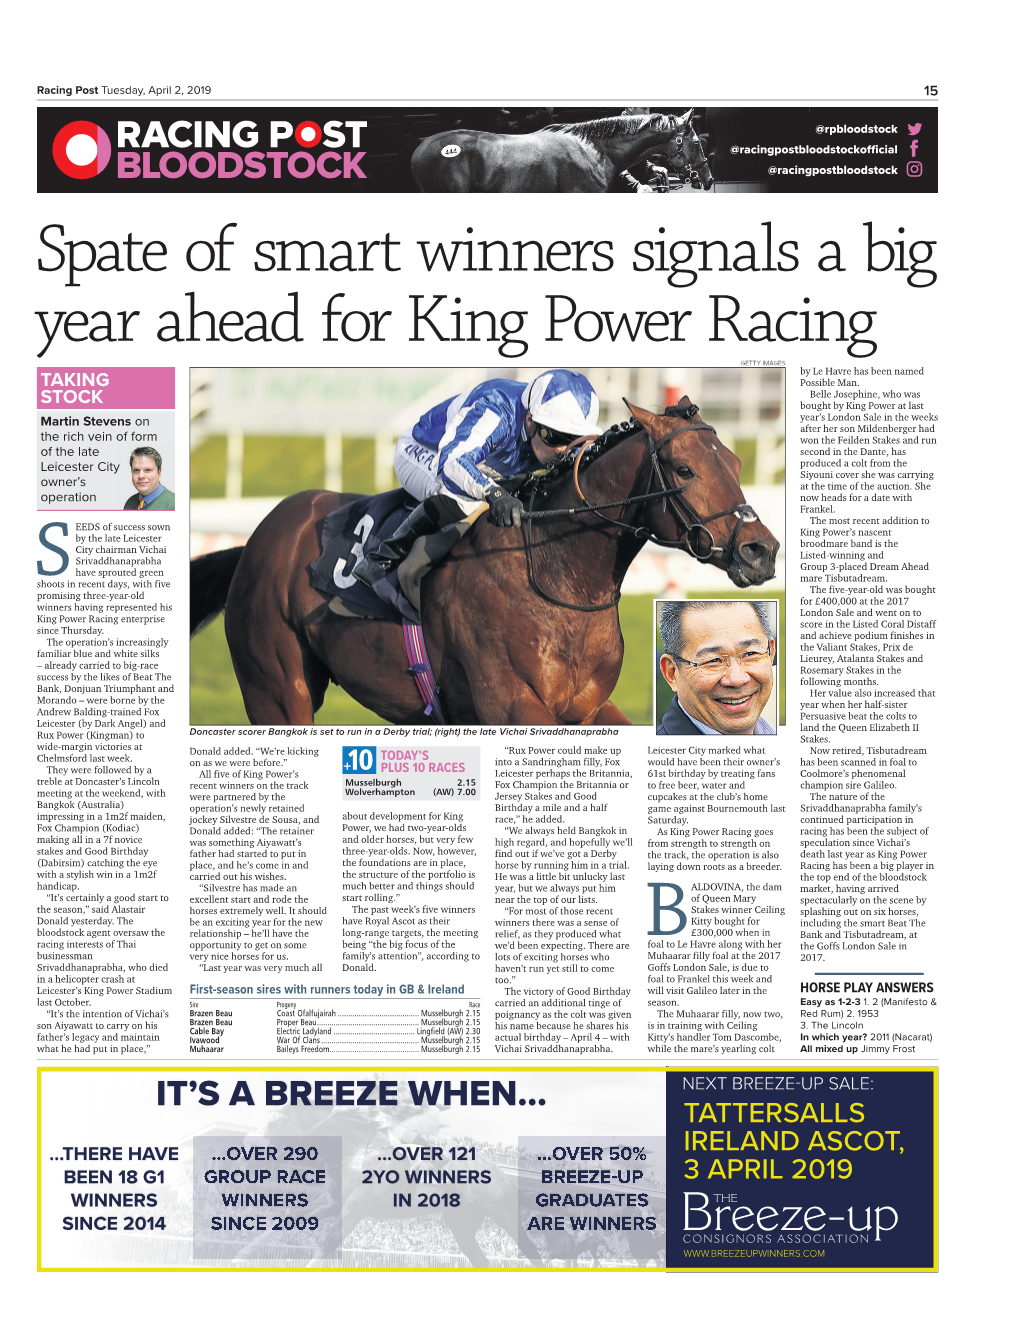 Spate of Smart Winners Signals a Big Year Ahead for King Power Racing